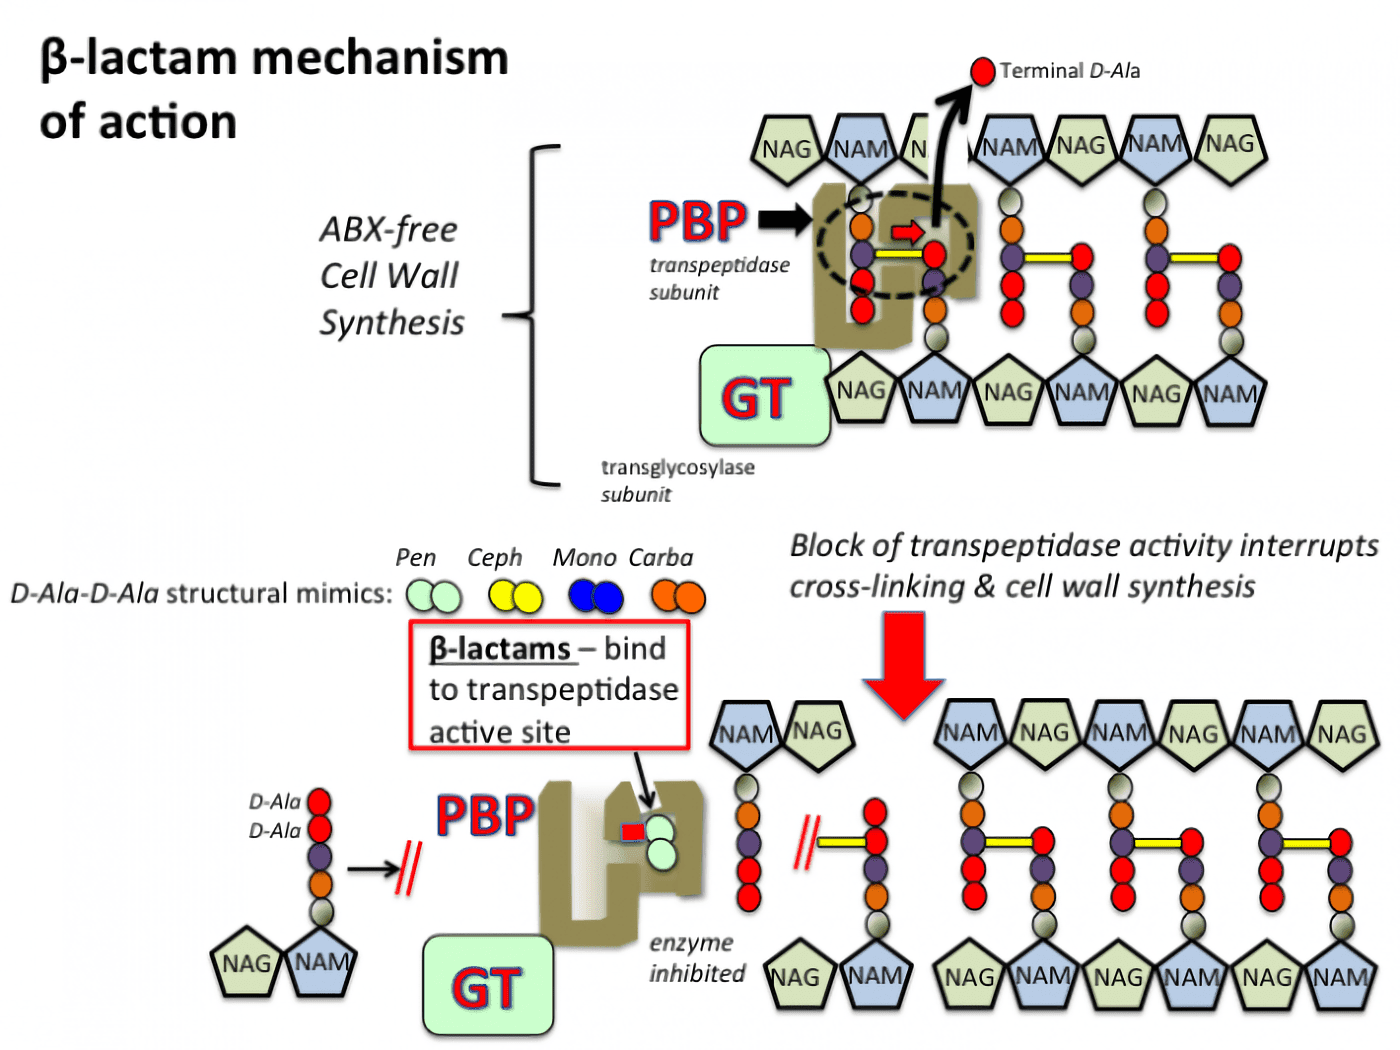 Mechanism of action of beta-lactam antibiotics. Top: In the absence of drug, transpeptidase enzymes (Penicillin Binding Proteins, PBP) in the cell wall catalyze cross-links between adjacent glycan chains. The net result of covalent bonds between both the peptide and sugar chains creates a rigid cell wall that protects the bacterial cell from osmotic forces that would otherwise result in cell rupture. Bottom: Beta-lactam antibiotics, which include penicillins (Pen), cephalosporins (Ceph), monobactams (Mono) and carbapenems (Carba) bear a structural resemblance to the natural D-Ala-D-Ala substrate for the transpeptidase, and exert their inhibitory effects on cell wall synthesis by tightly binding to the active site of the transpeptidase (PBP). GT: Glycosyltransferases; NAG: N-acetylglucosamine; NAM: N-acetylmuramic acid. Structure of PBP adapted from Mcstrother.